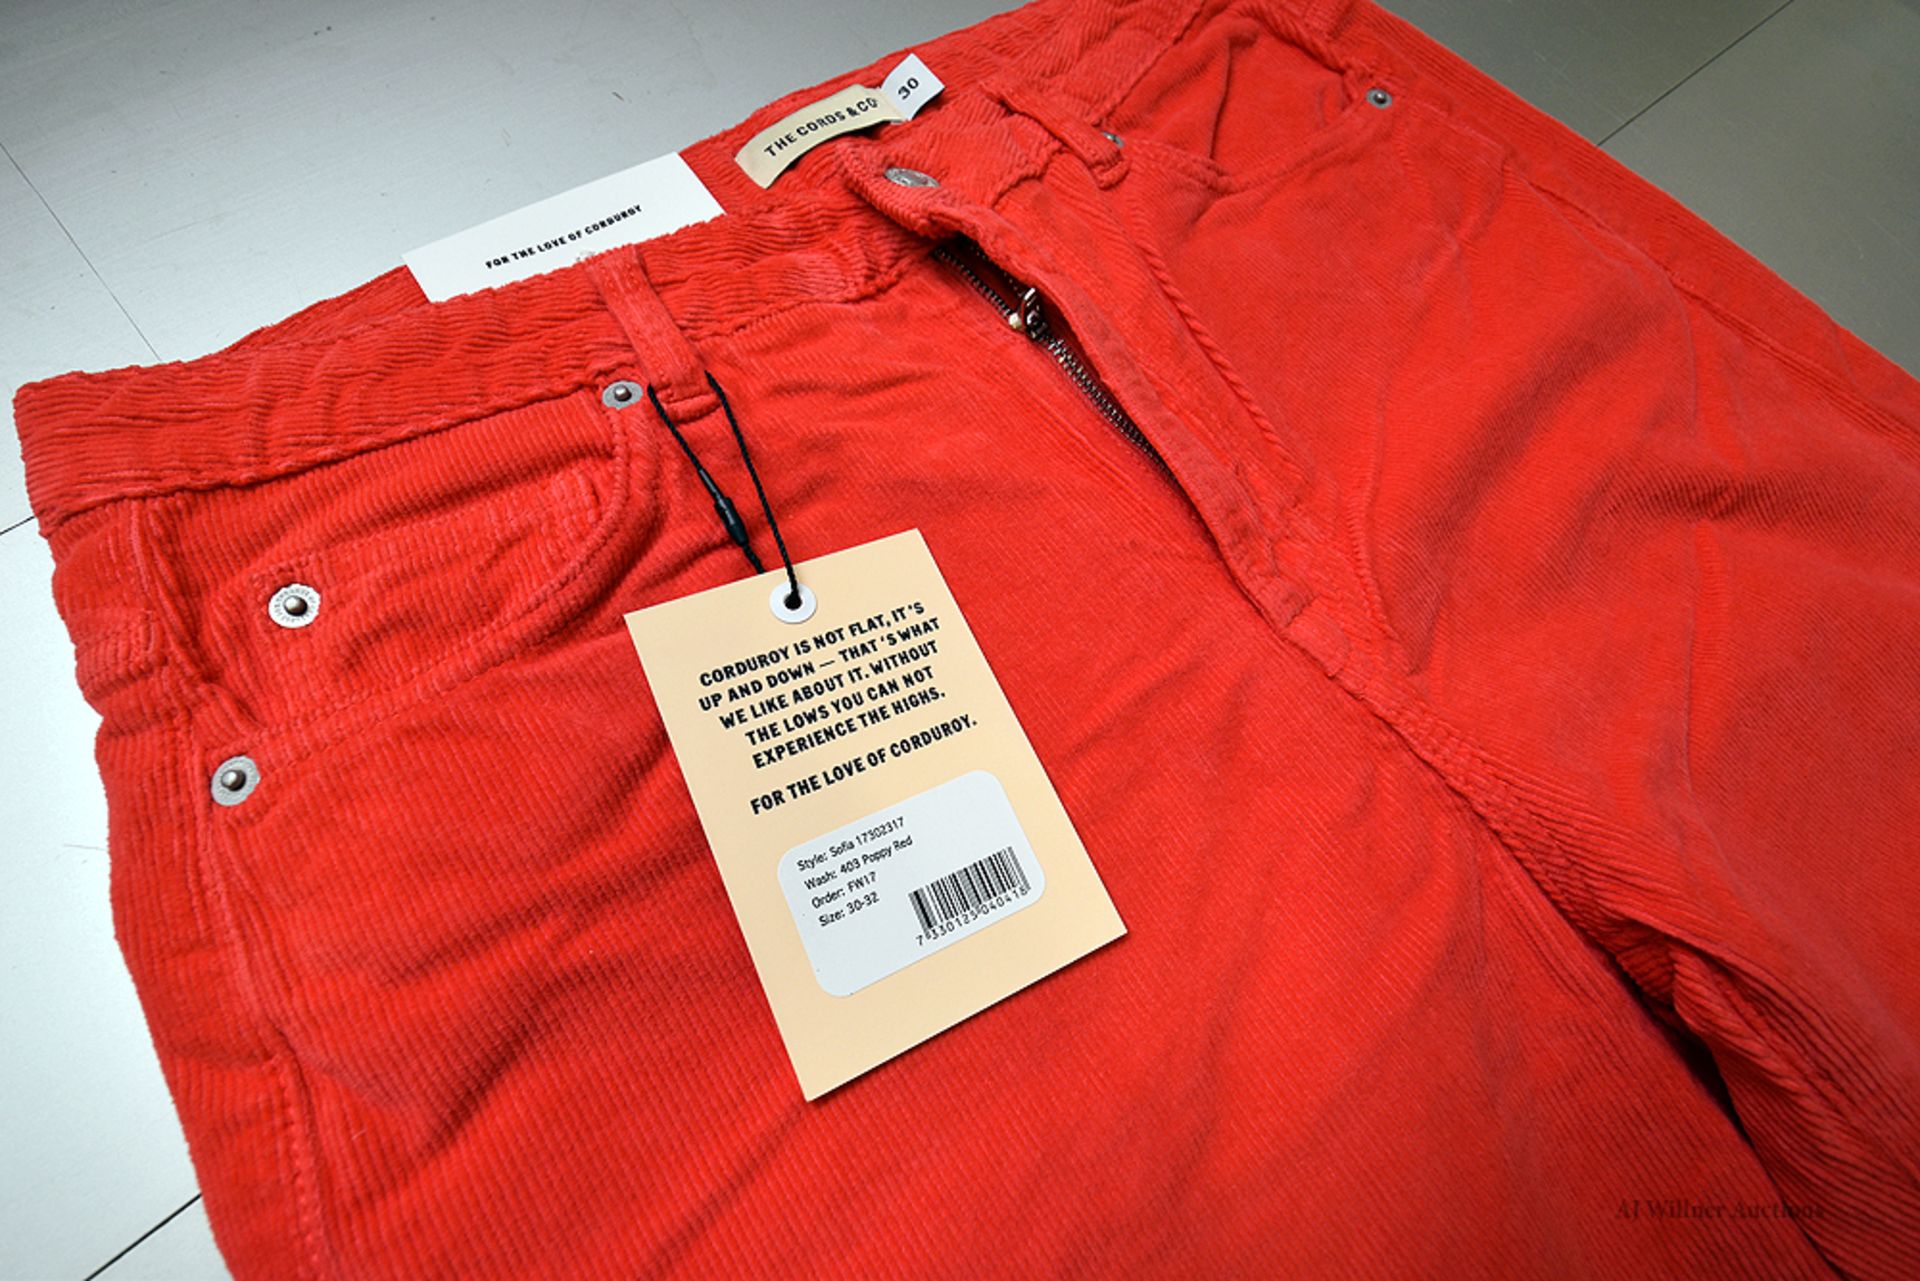 The Cords & Co. "Sofia" Style,Womens/High-Waist/Straight Fit/Cropped Leg Pants. Poppy Red&Denim Blue - Image 5 of 5